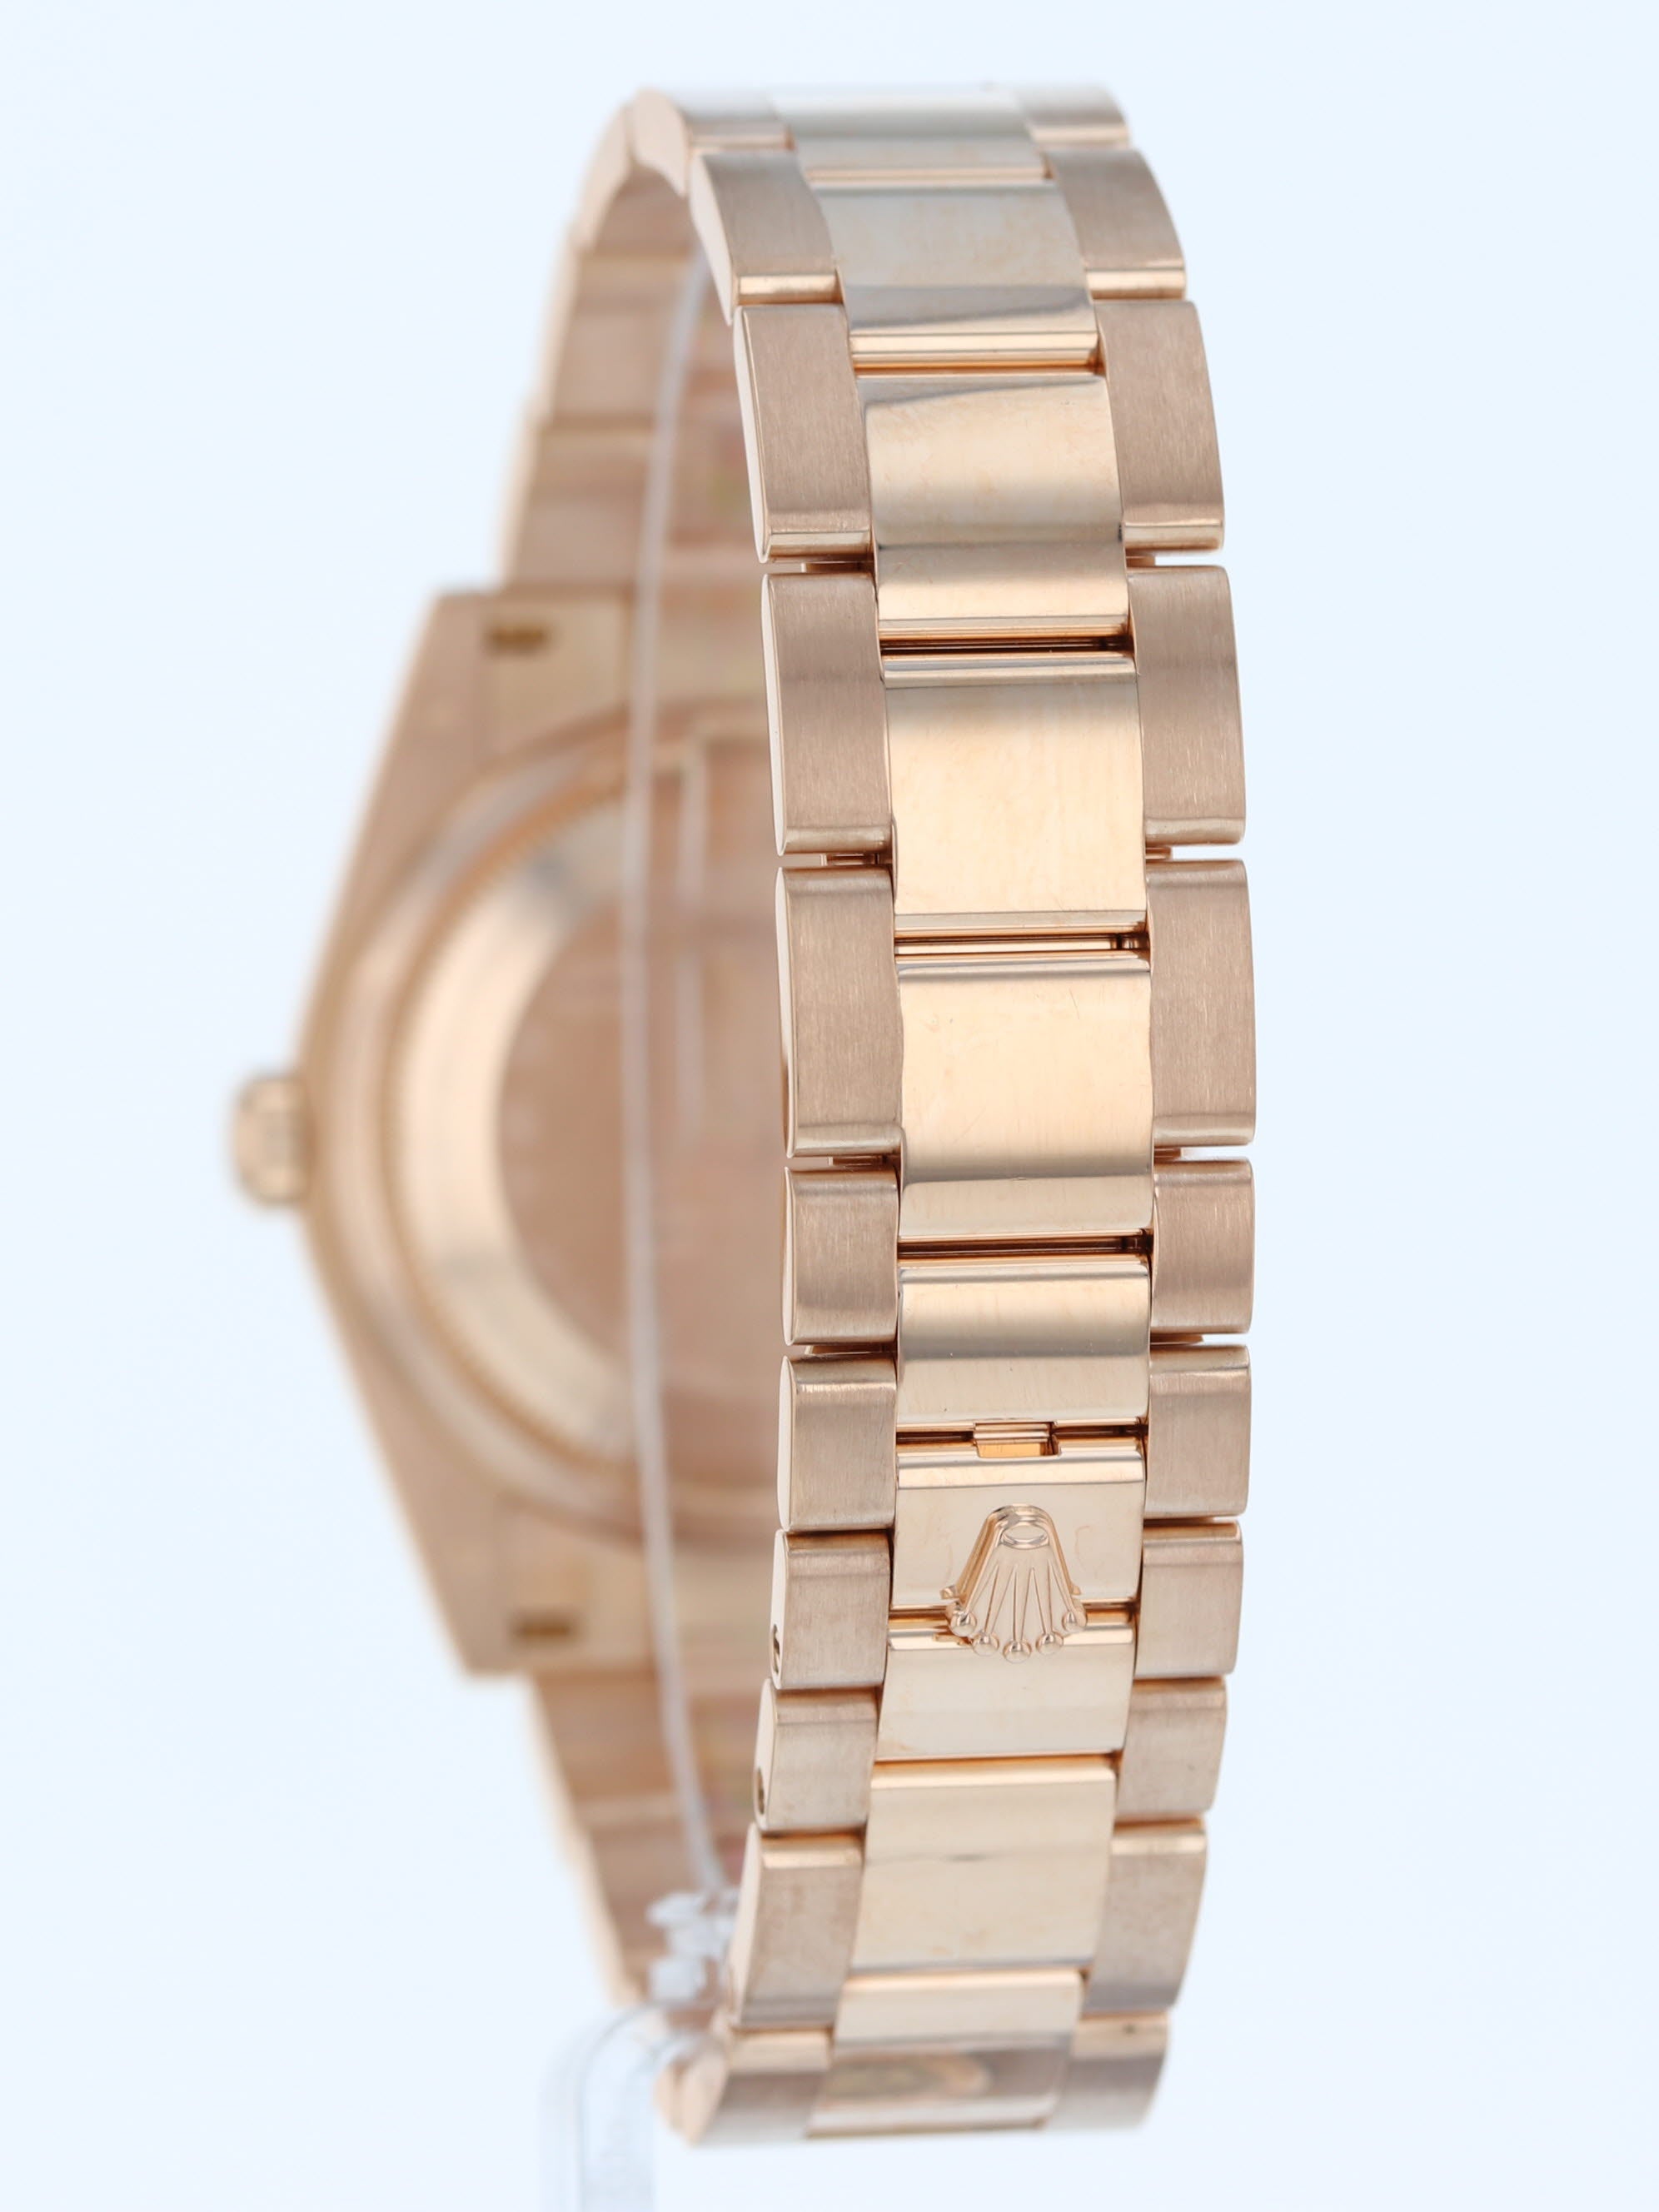 39267: Rolex 18k Rose Gold Day-Date, Ref. 118205, Box and 2009 